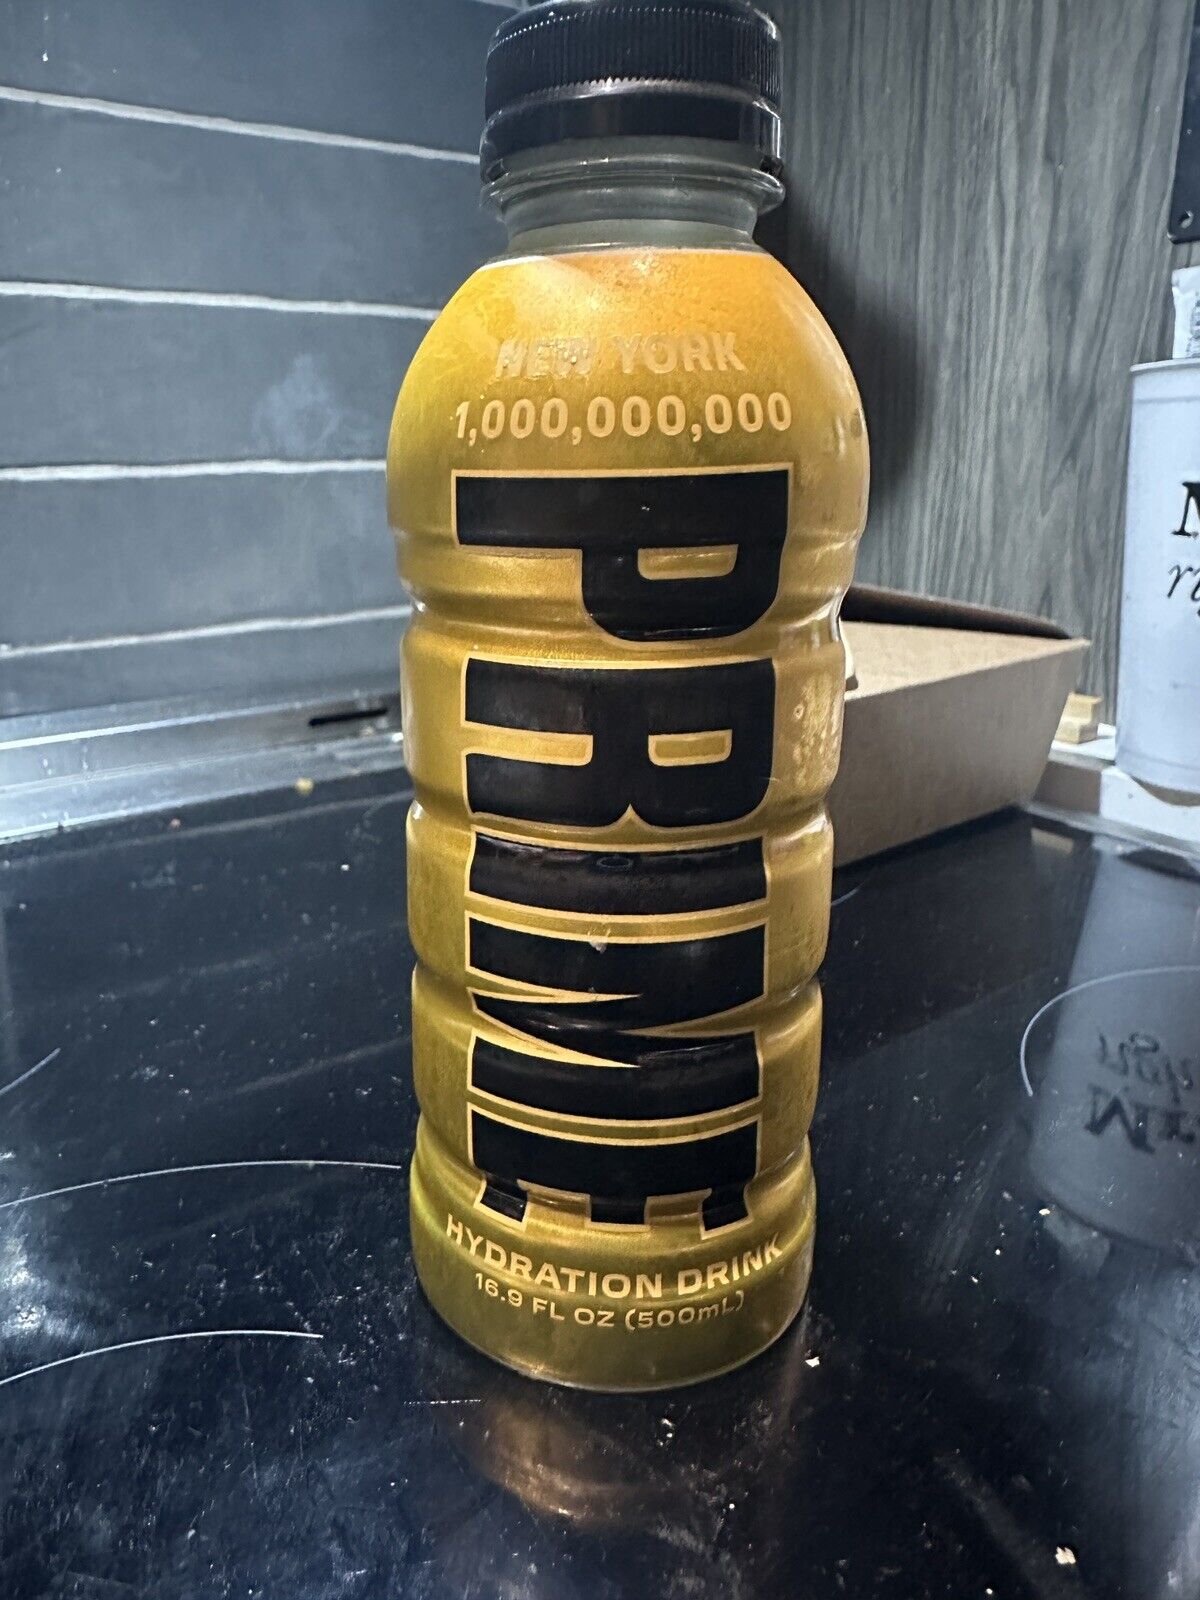 PRIME HYDRATION DRINK 500ml GOLD NYC 1 MILLION LIMITED  RARE Empty